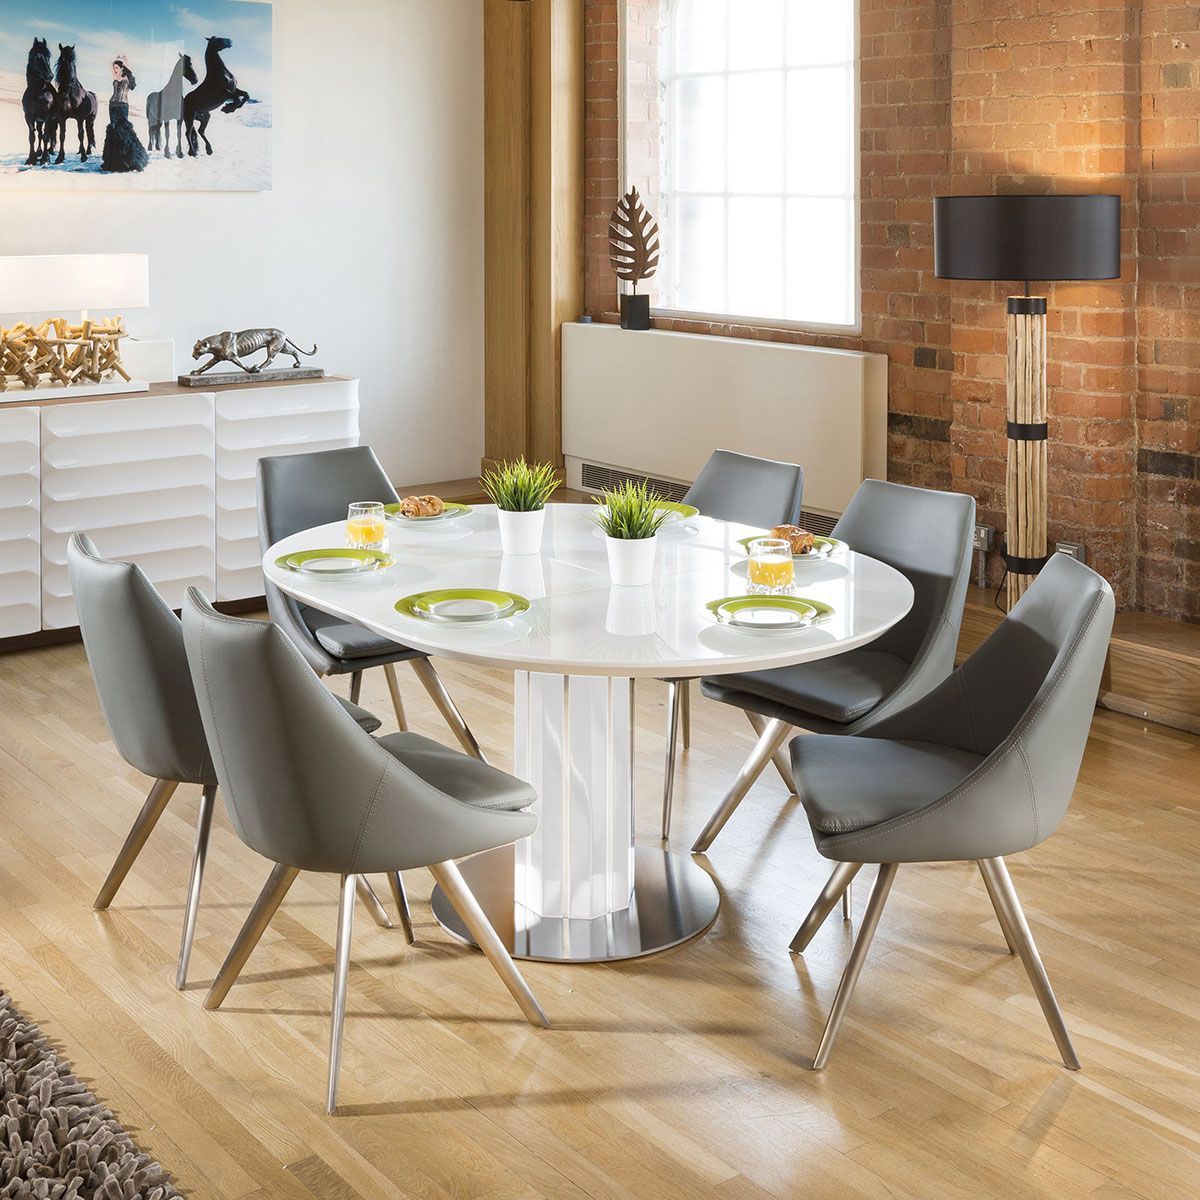 Modern Extending Dining Set Round / Oval Glass Wht Table 6 Grey Chairs Throughout Extendable Oval Dining Sets (View 12 of 15)